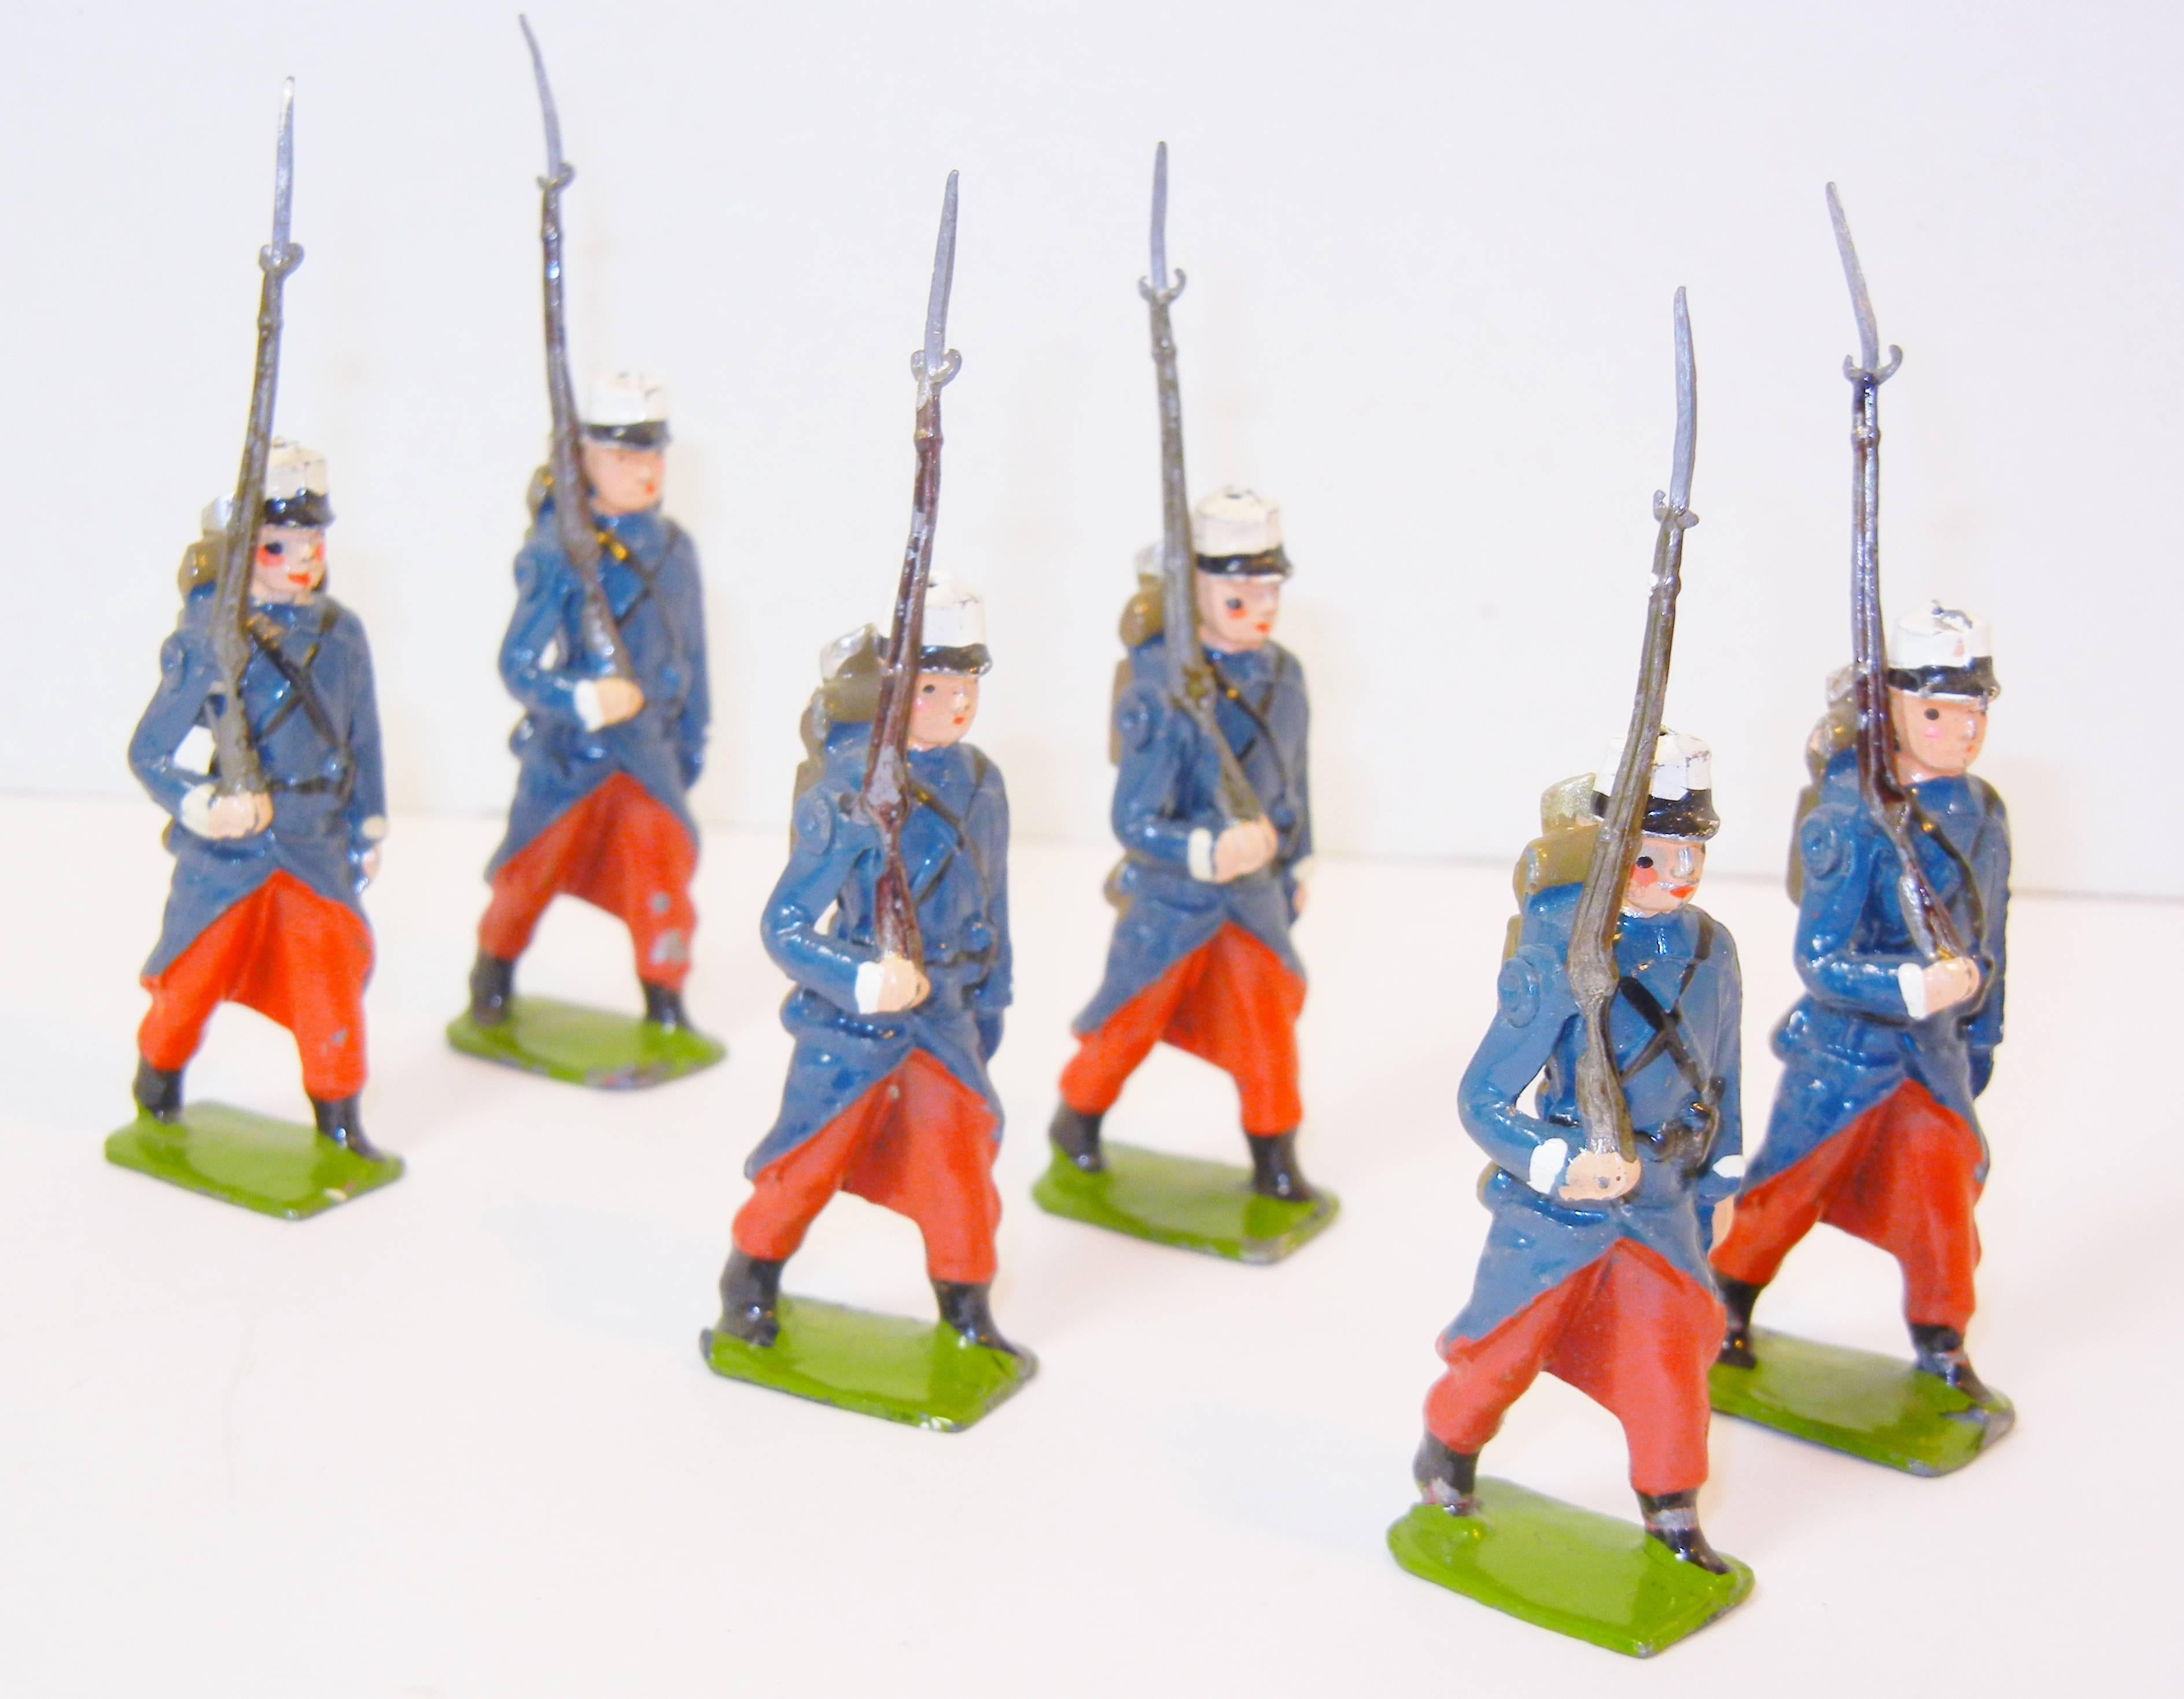 Campaign French Foreign Legion, Vintage Toy Soldiers by W. Britain Ltd